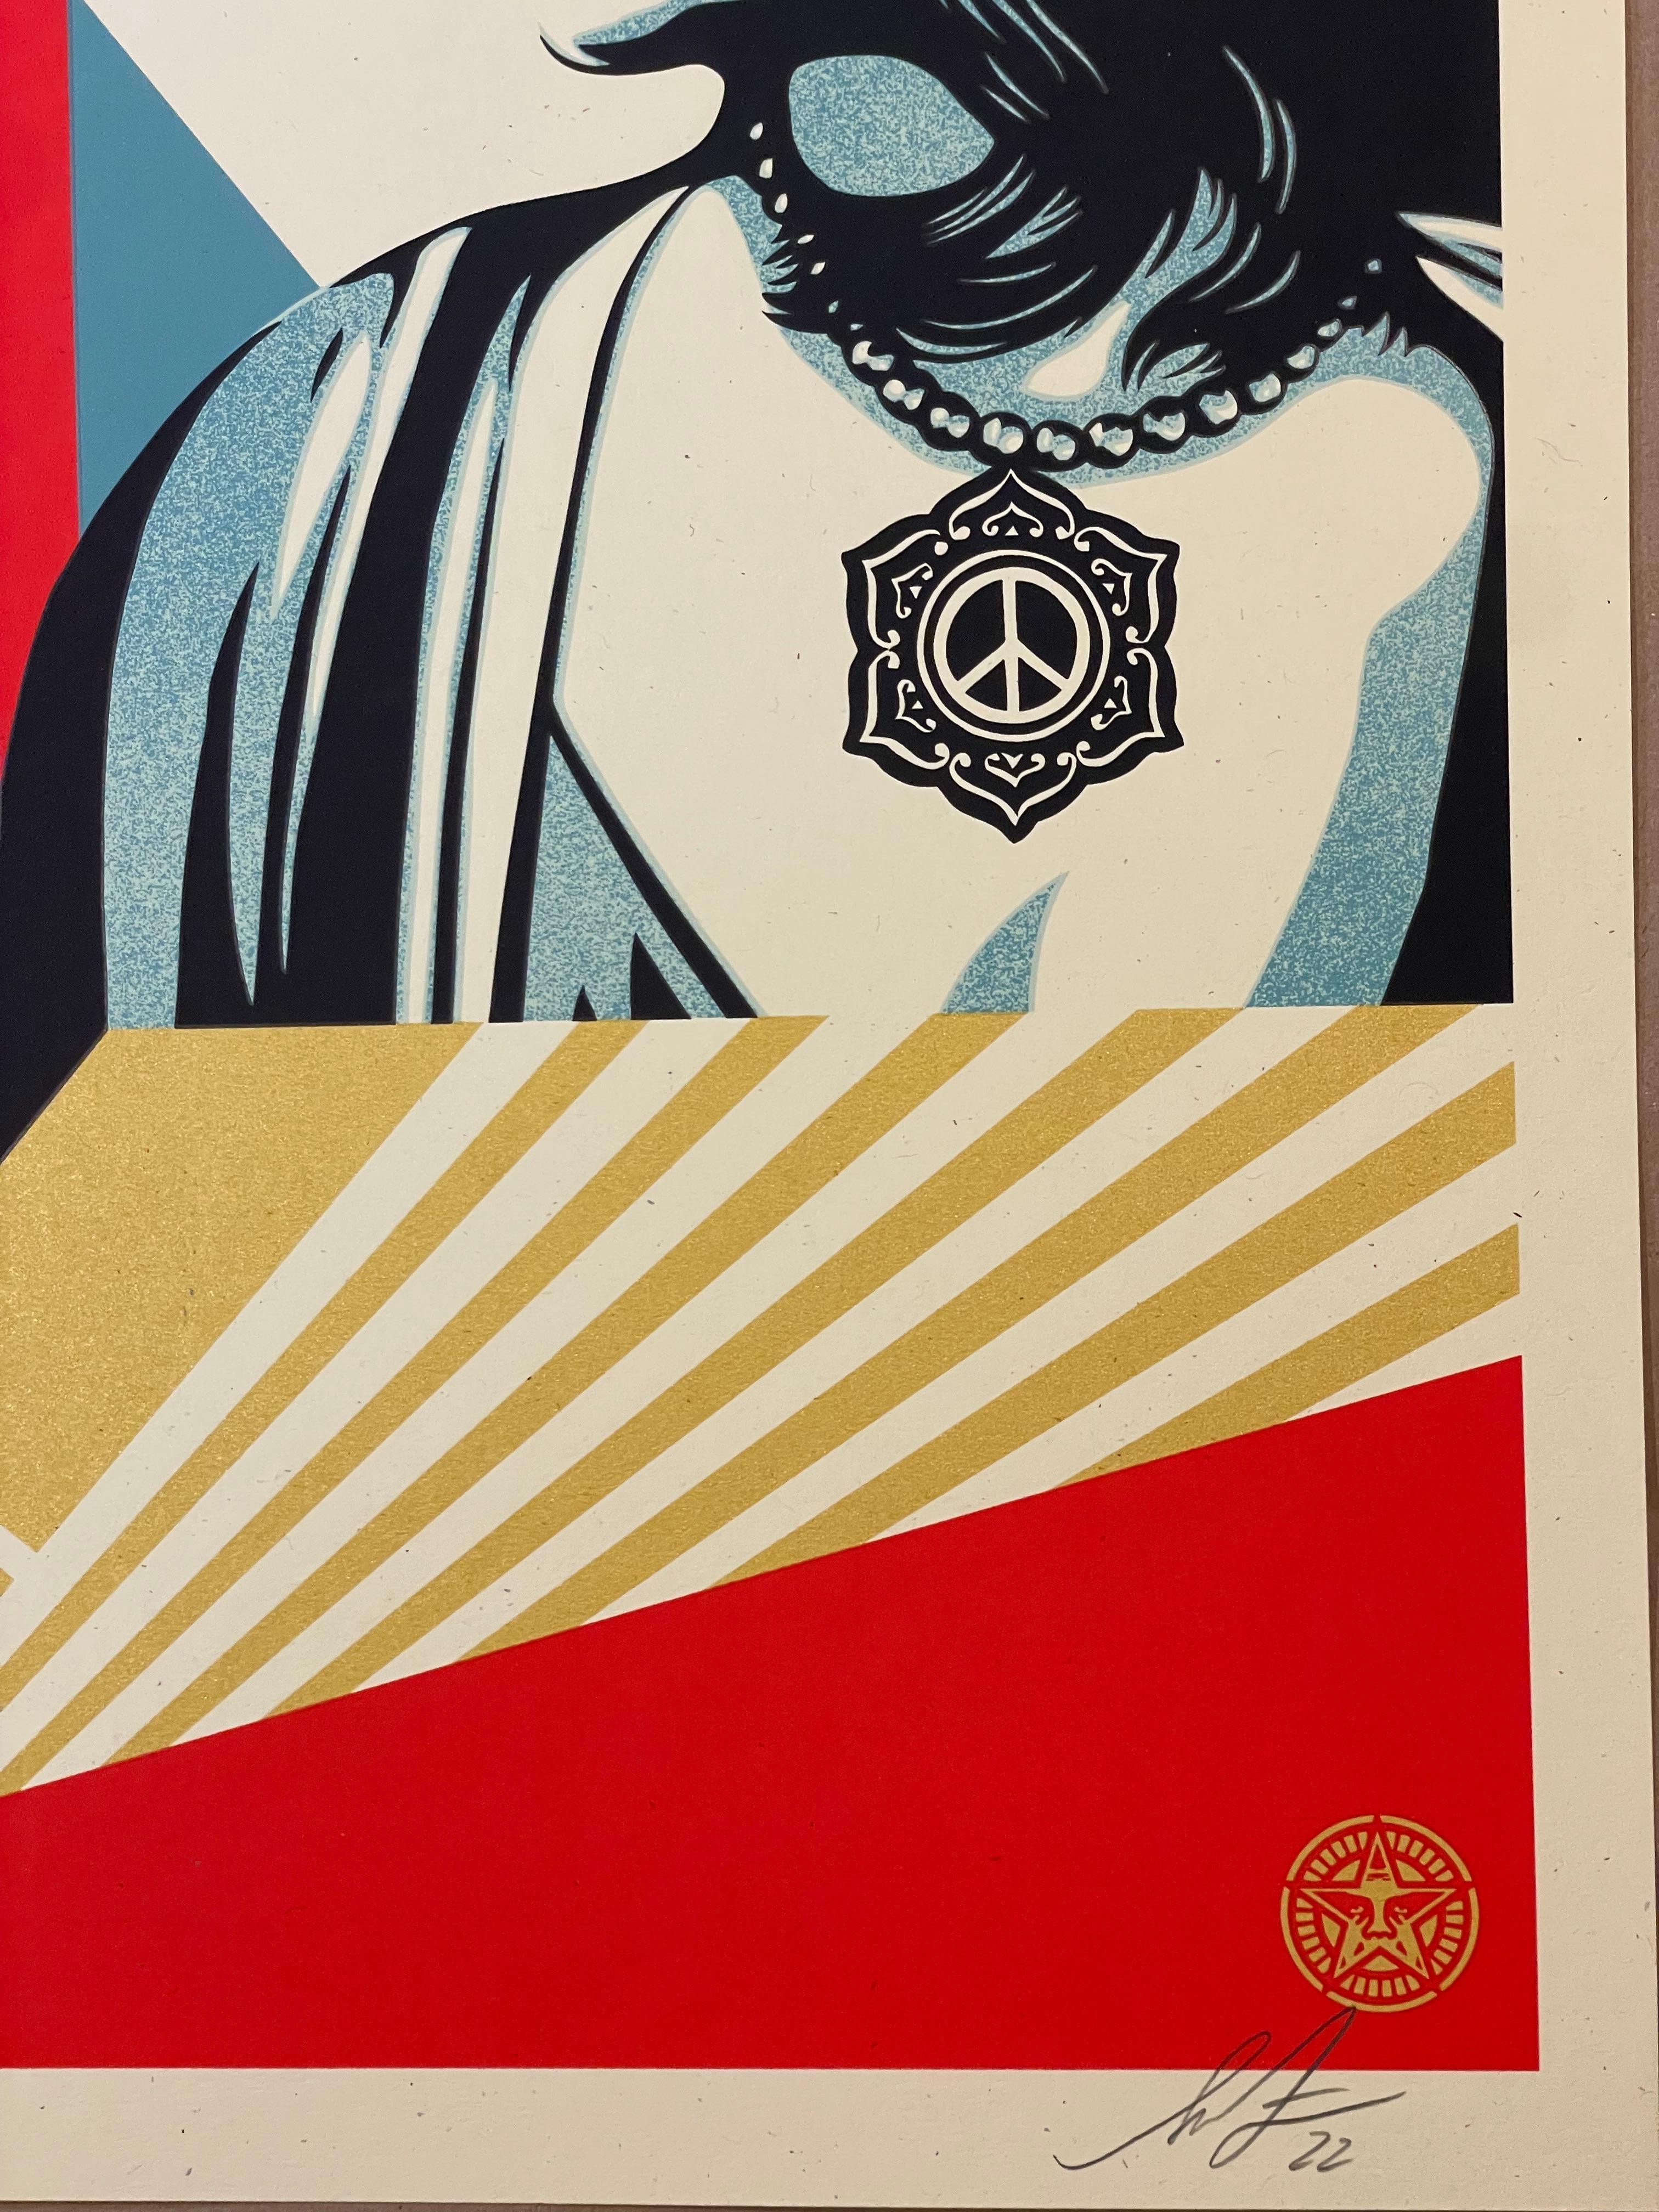 Manufacturer:
Obey Giant
Edition Details:
Status:	Official
Edition Run:	650
Technique:	Screen Print
Paper:	Fine Art Thick Cream Speckletone with gold metallic inks 
Size:	18 X 24
Markings:	Signed & Numbered

This print is numbered 637/650 and is